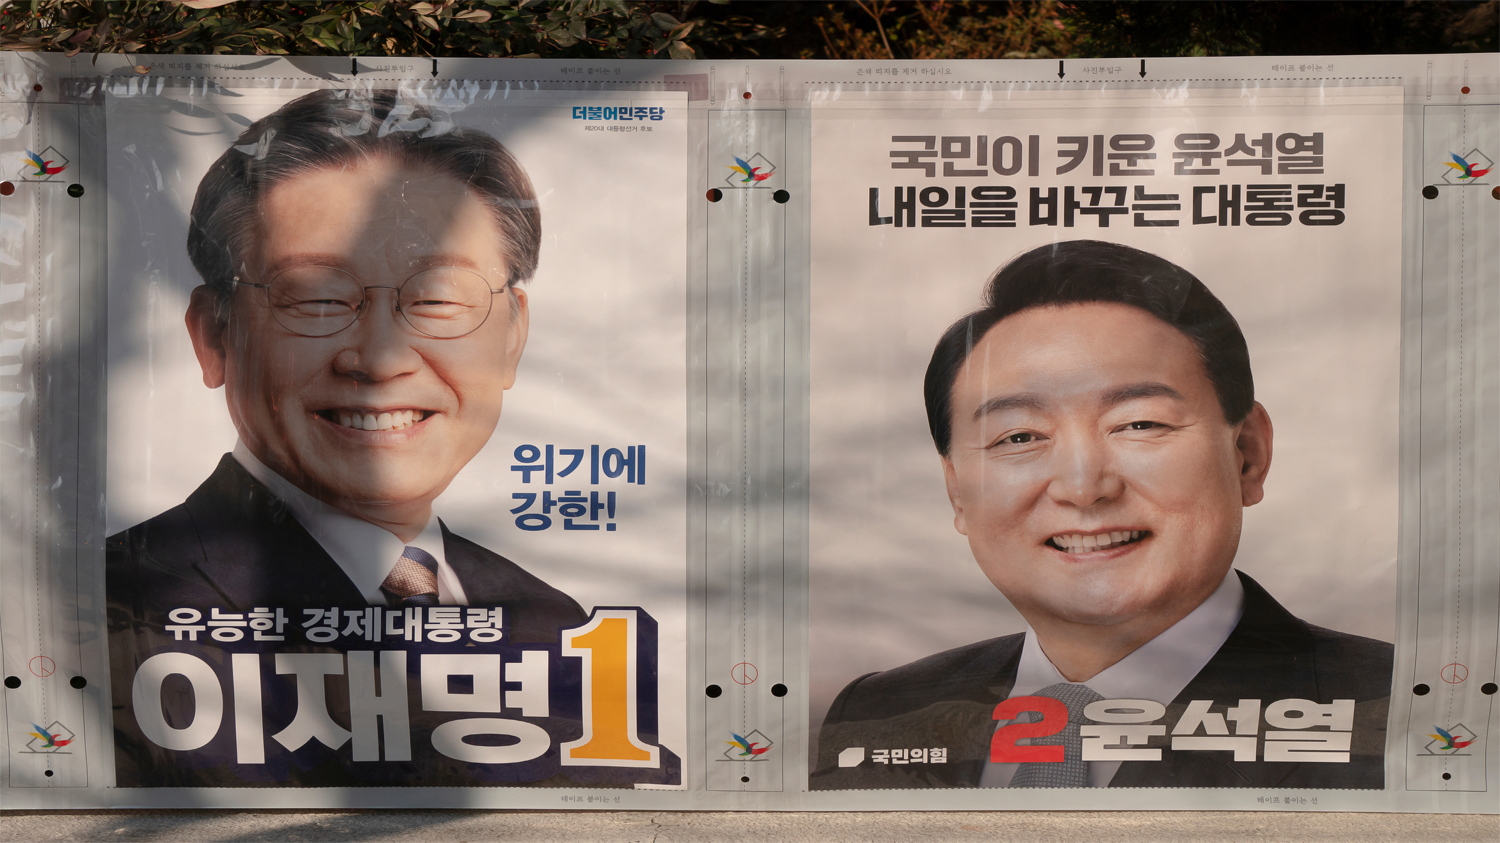 [ADRN Issue Briefing] South Korea’s 2022 Presidential Election: A Vox Populi that is Evenly Divided